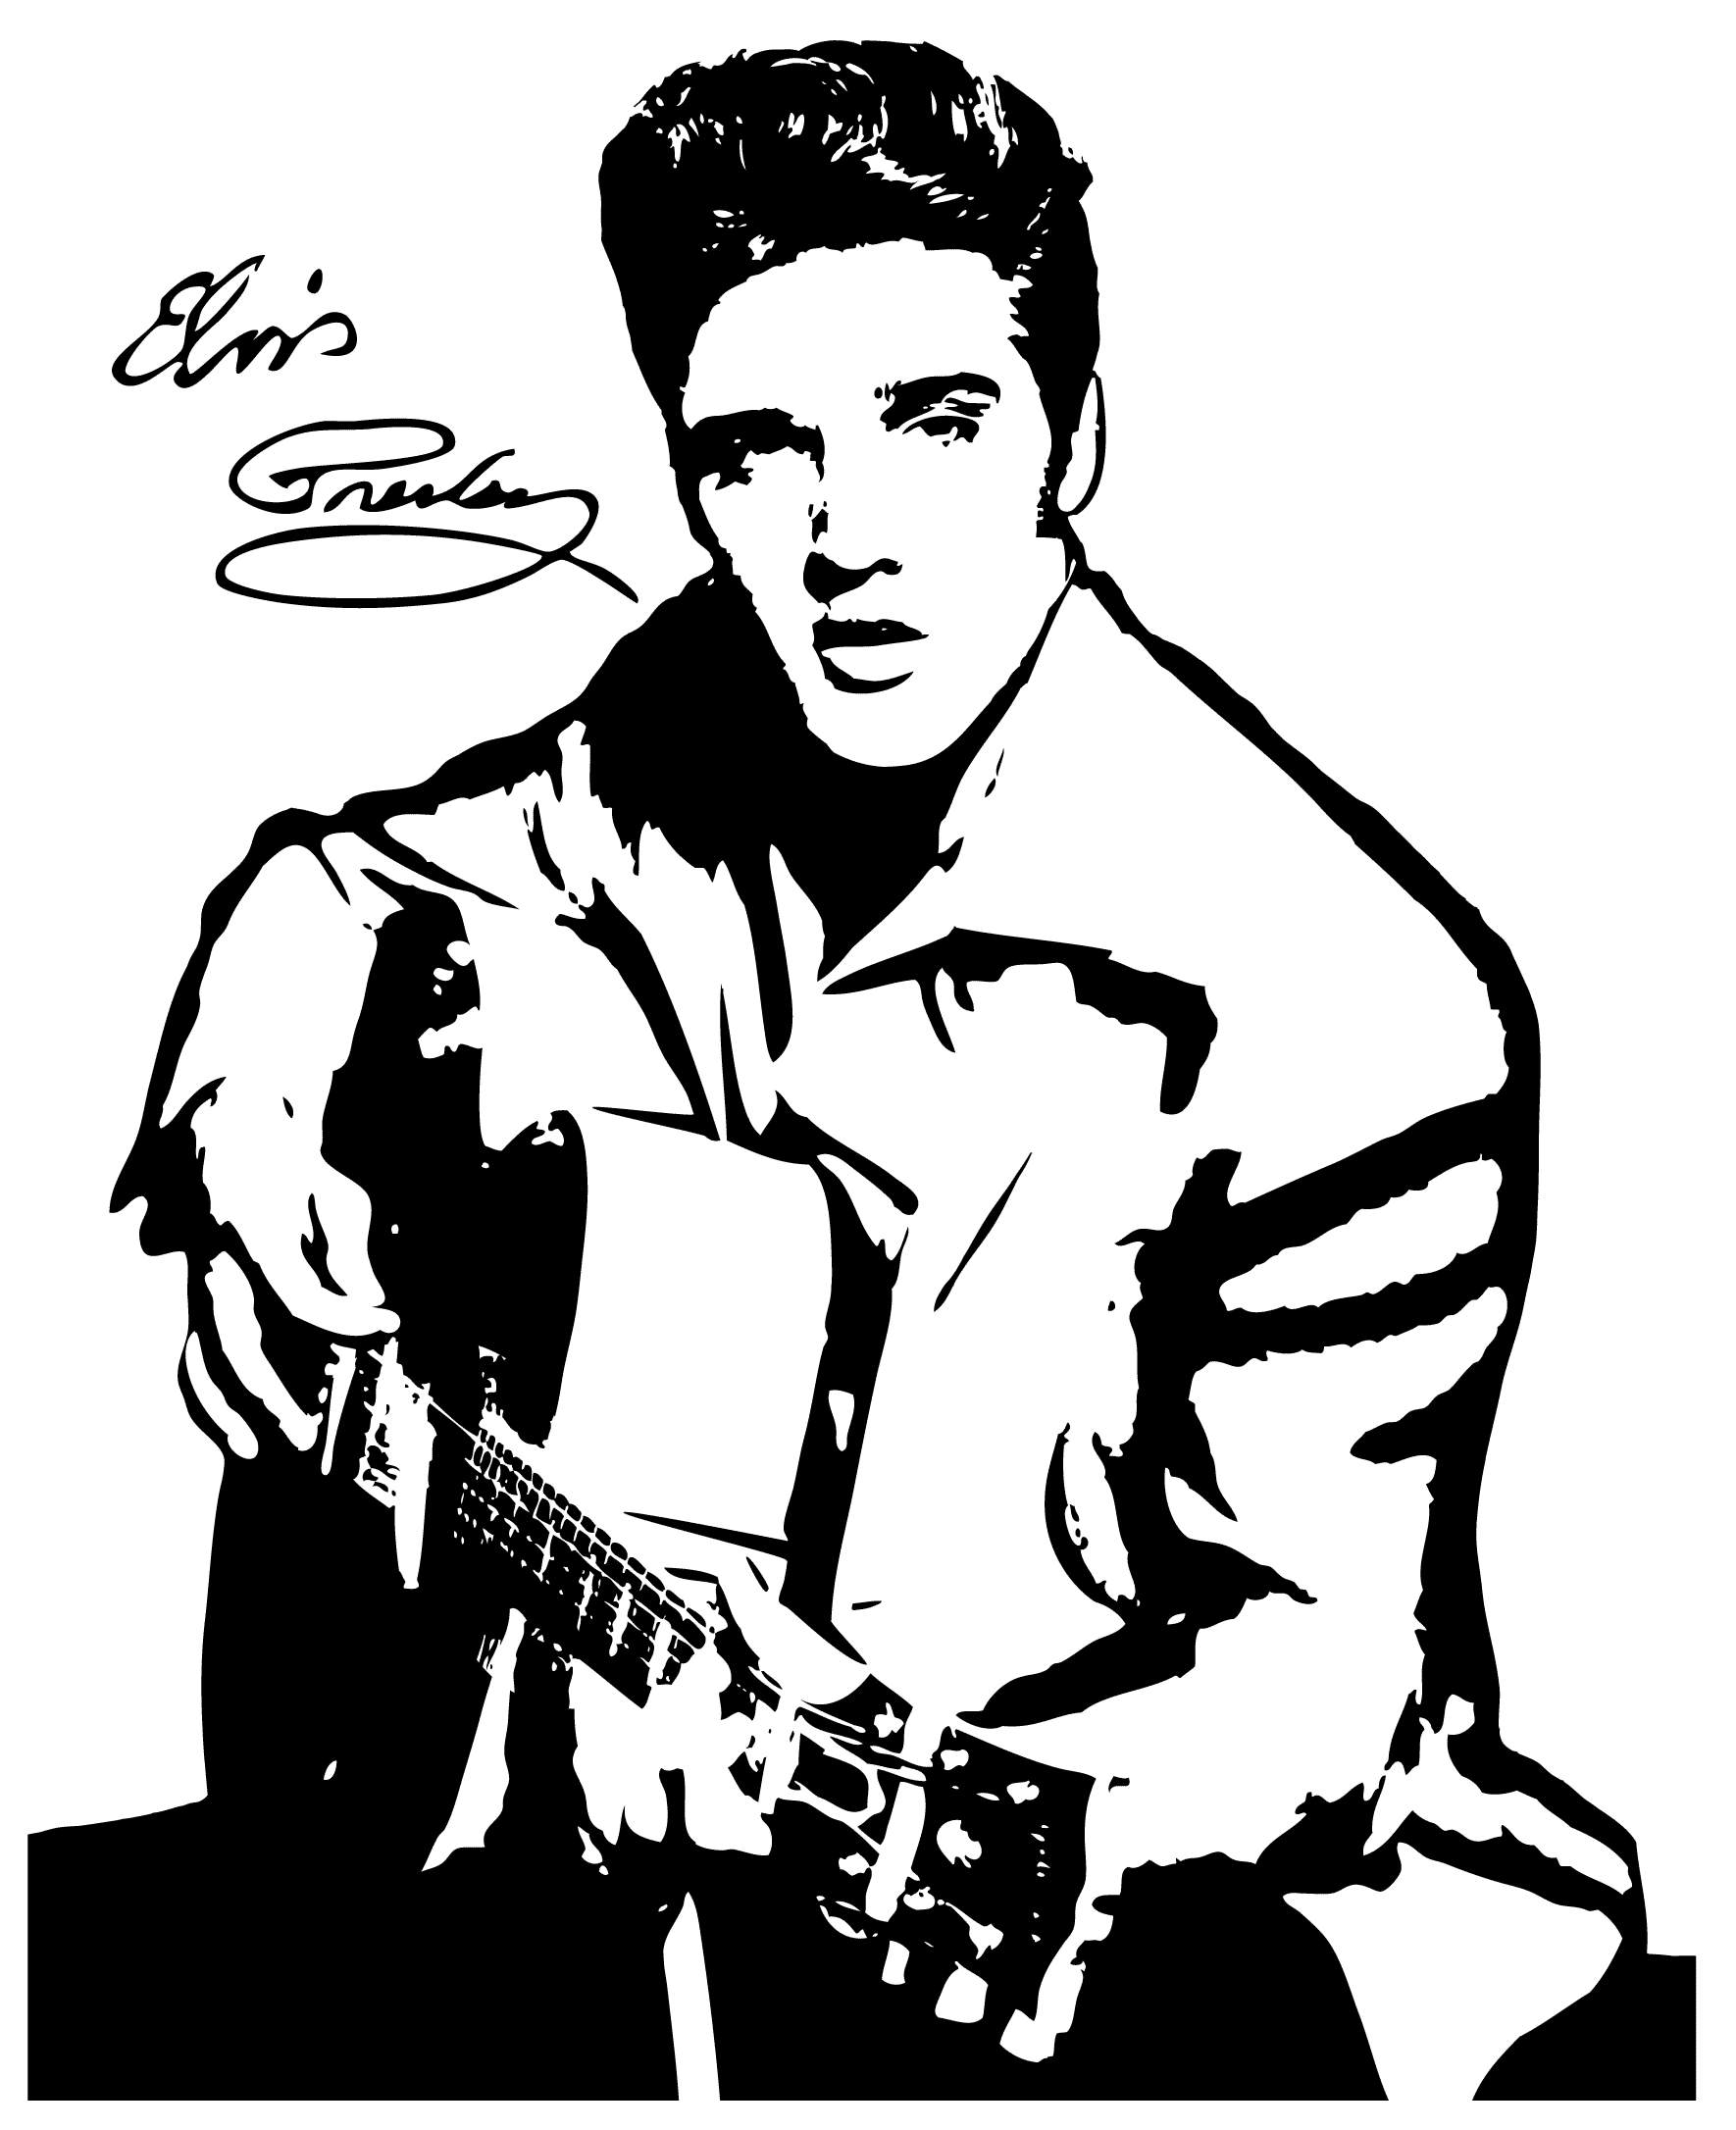 Line drawing at getdrawings. Elvis clipart portrait